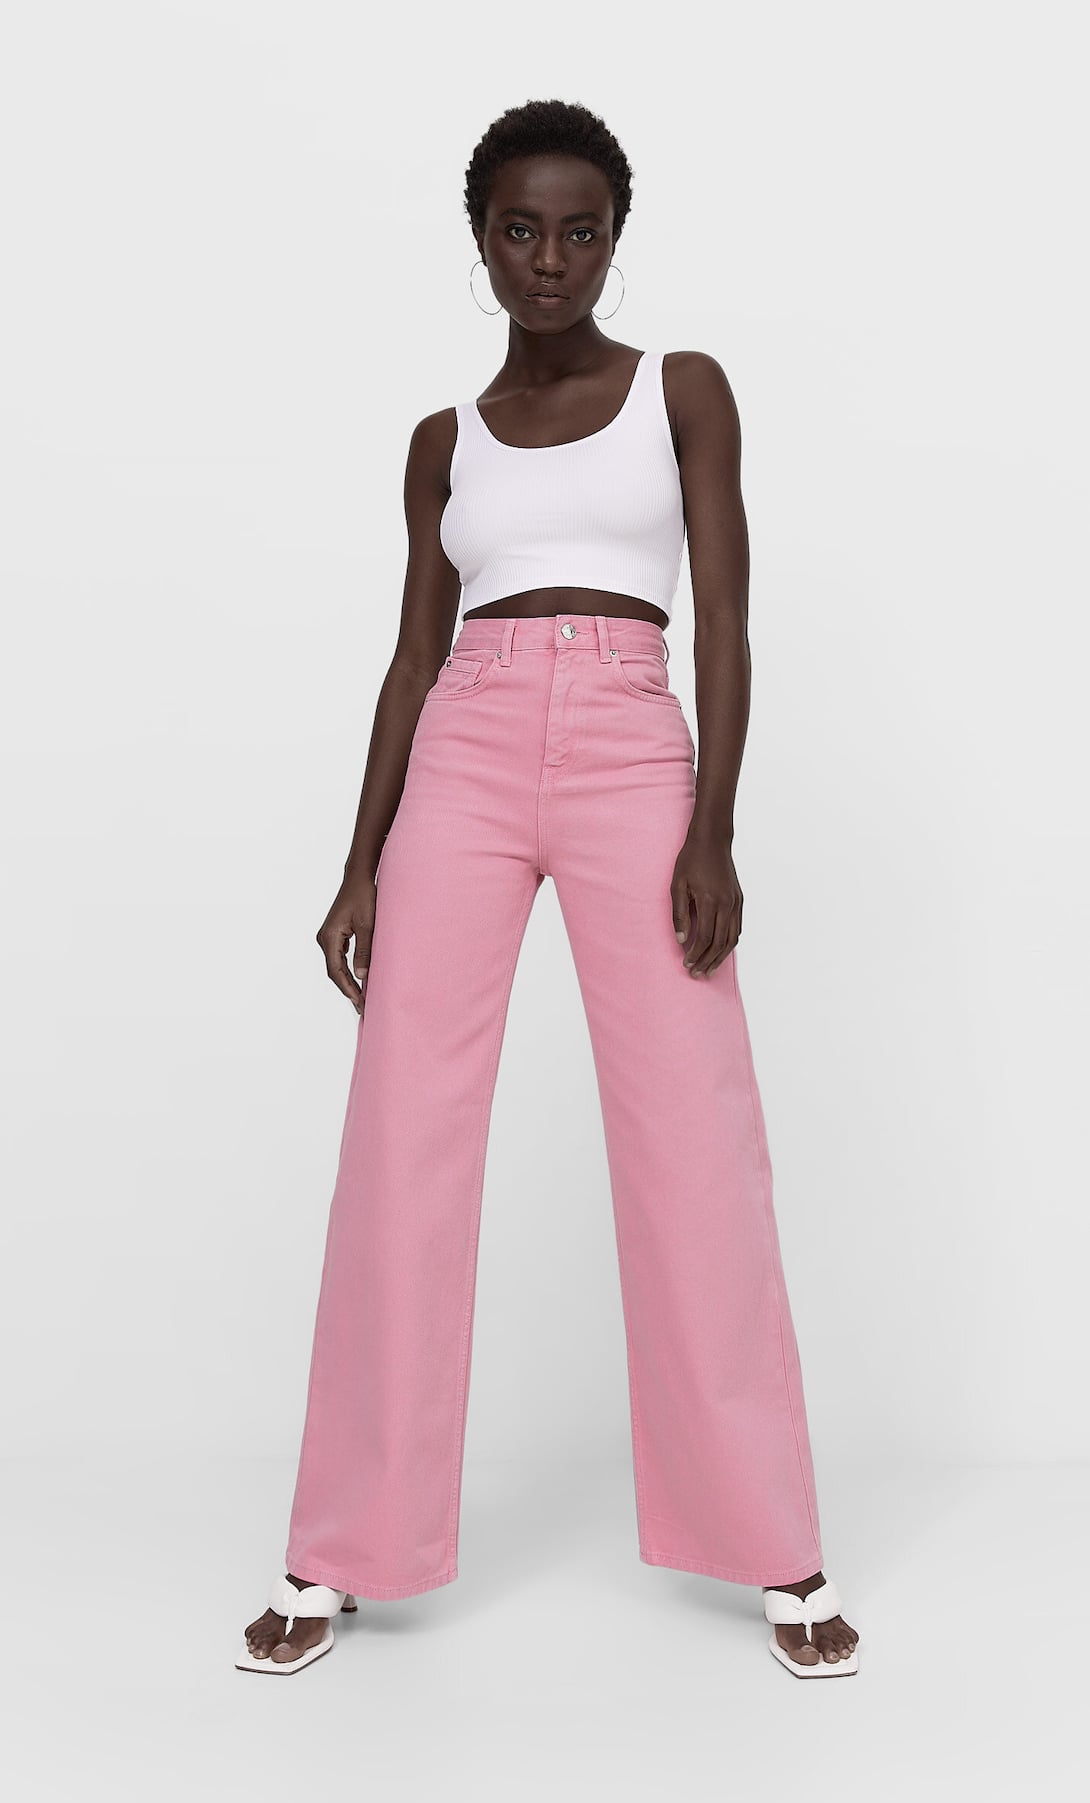 COMFY CUTIE PINK DENIM PANTS l FLYING TOMATO | Flying Tomato